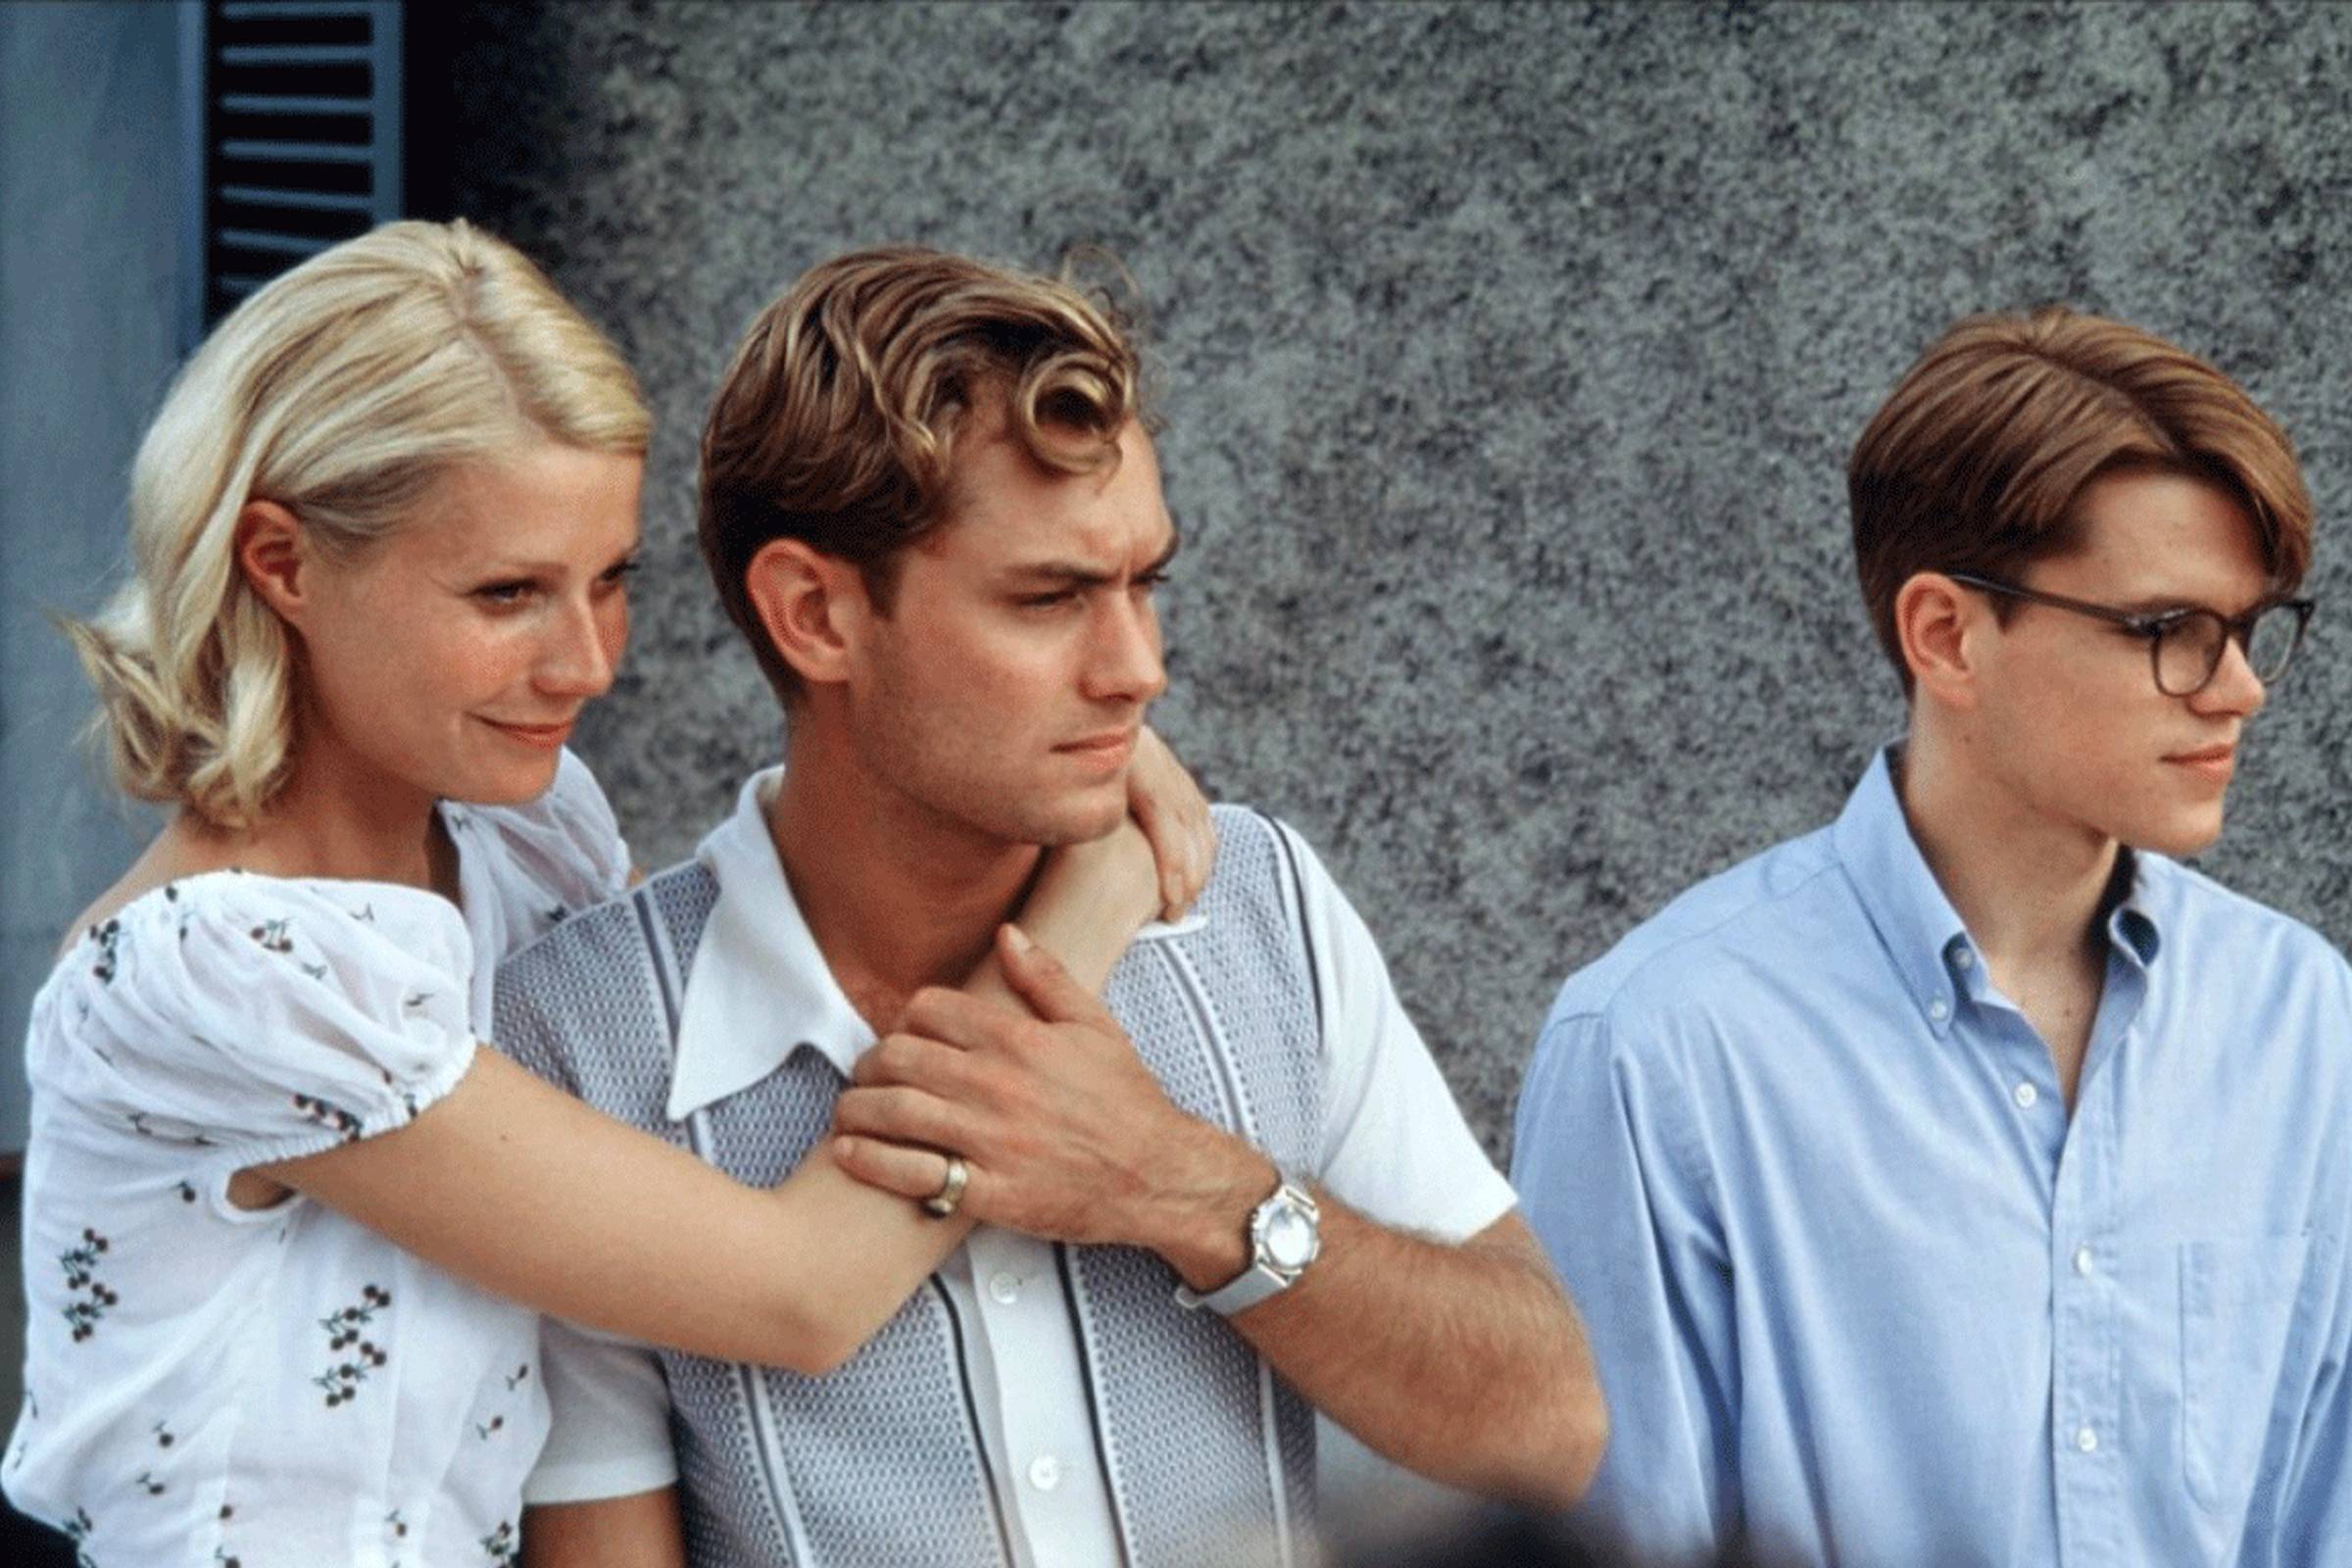 The Best Of The Talented Mr. Ripley – Mr Essentialist